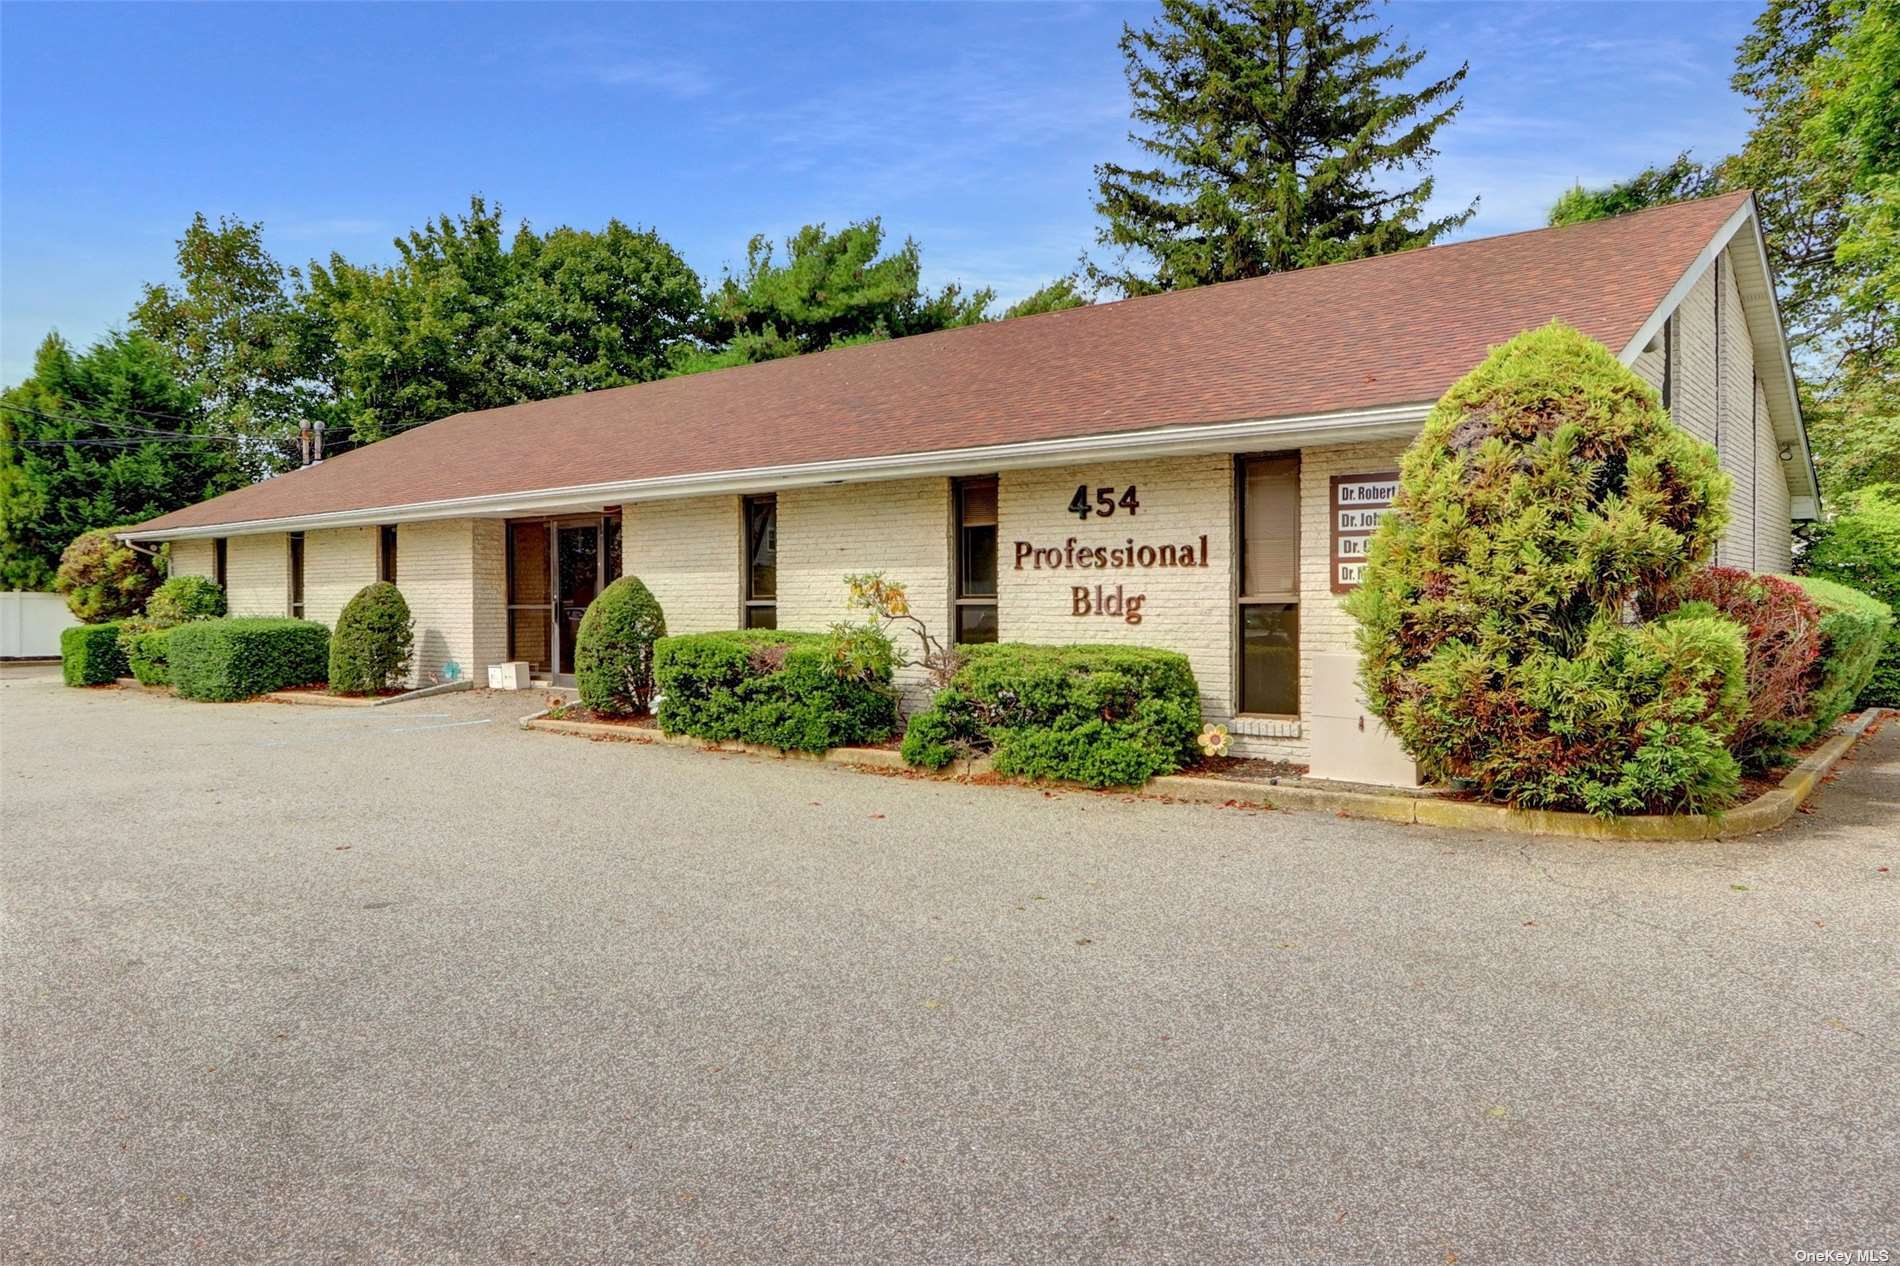 Commercial Sale Deer Park  Suffolk, NY 11702, MLS-3507755-3